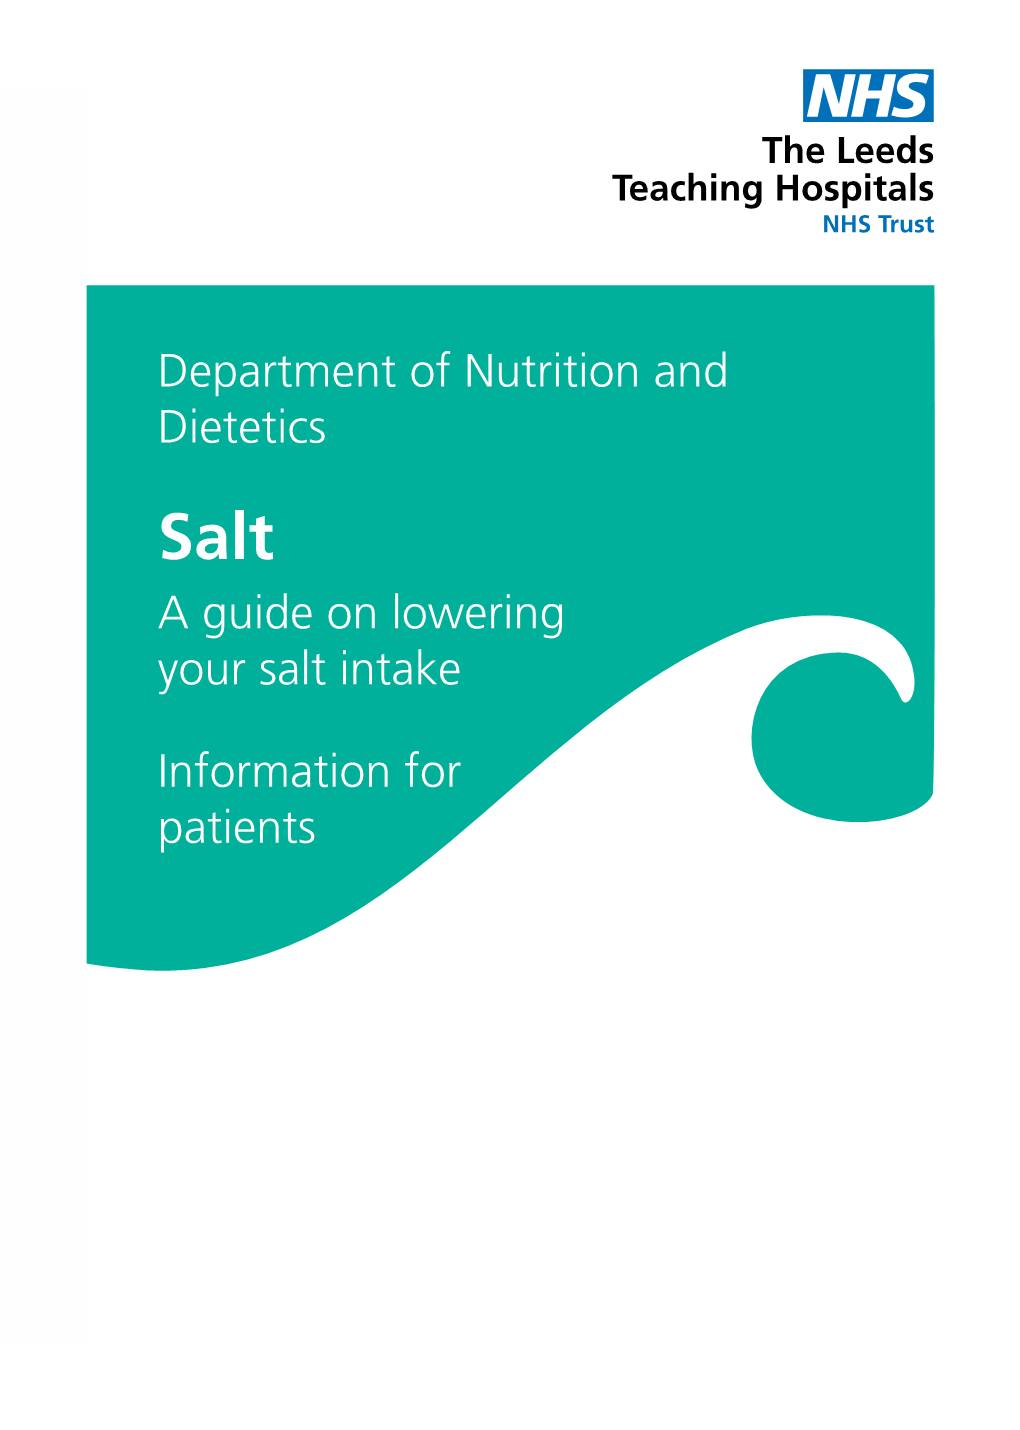 Department of Nutrition and Dietetics a Guide on Lowering Your Salt Intake